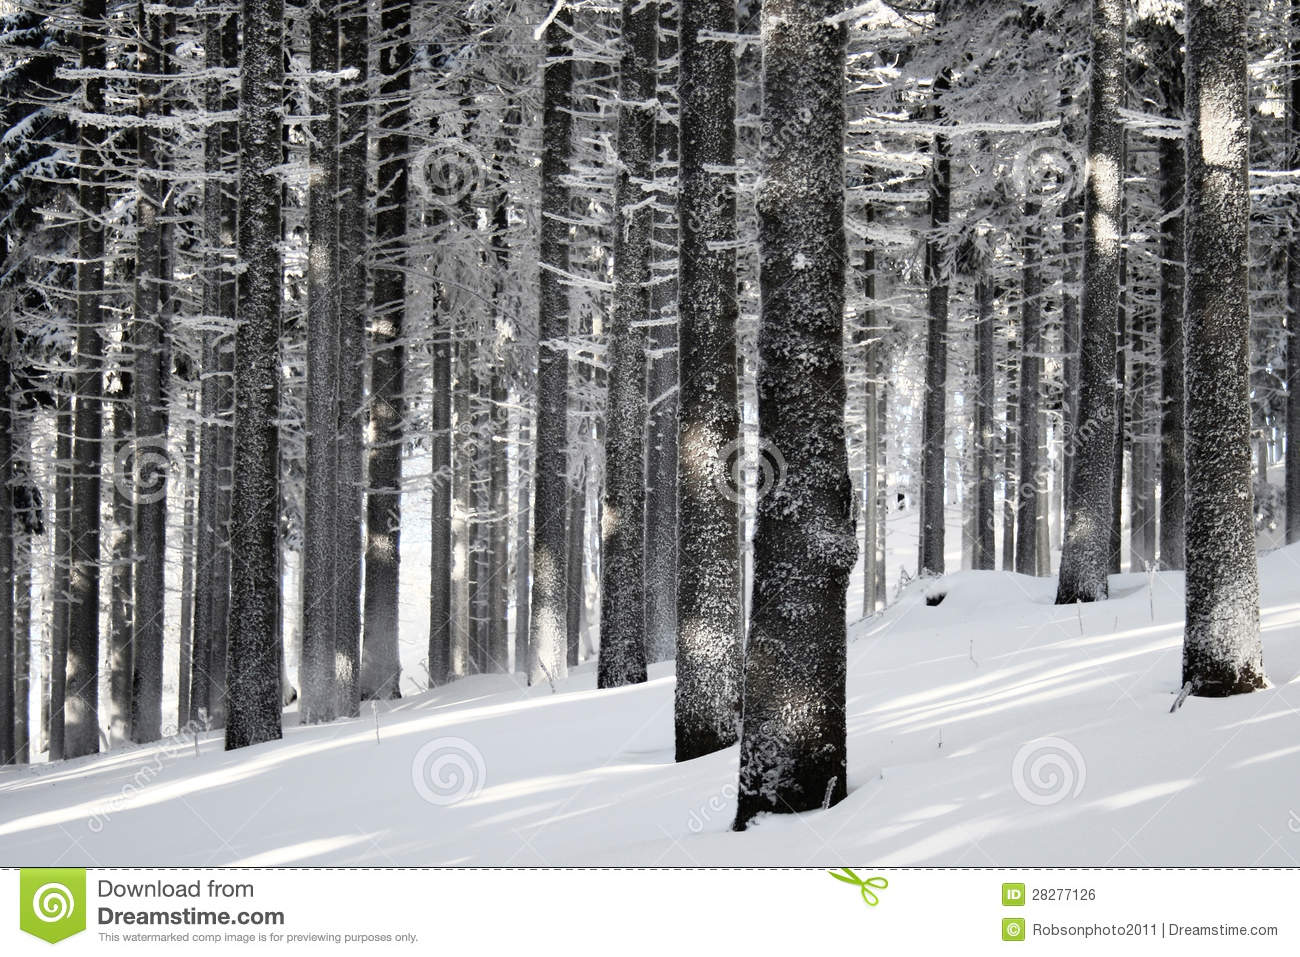 Winter Forest Scene Royalty Free Stock Image   Image  28277126